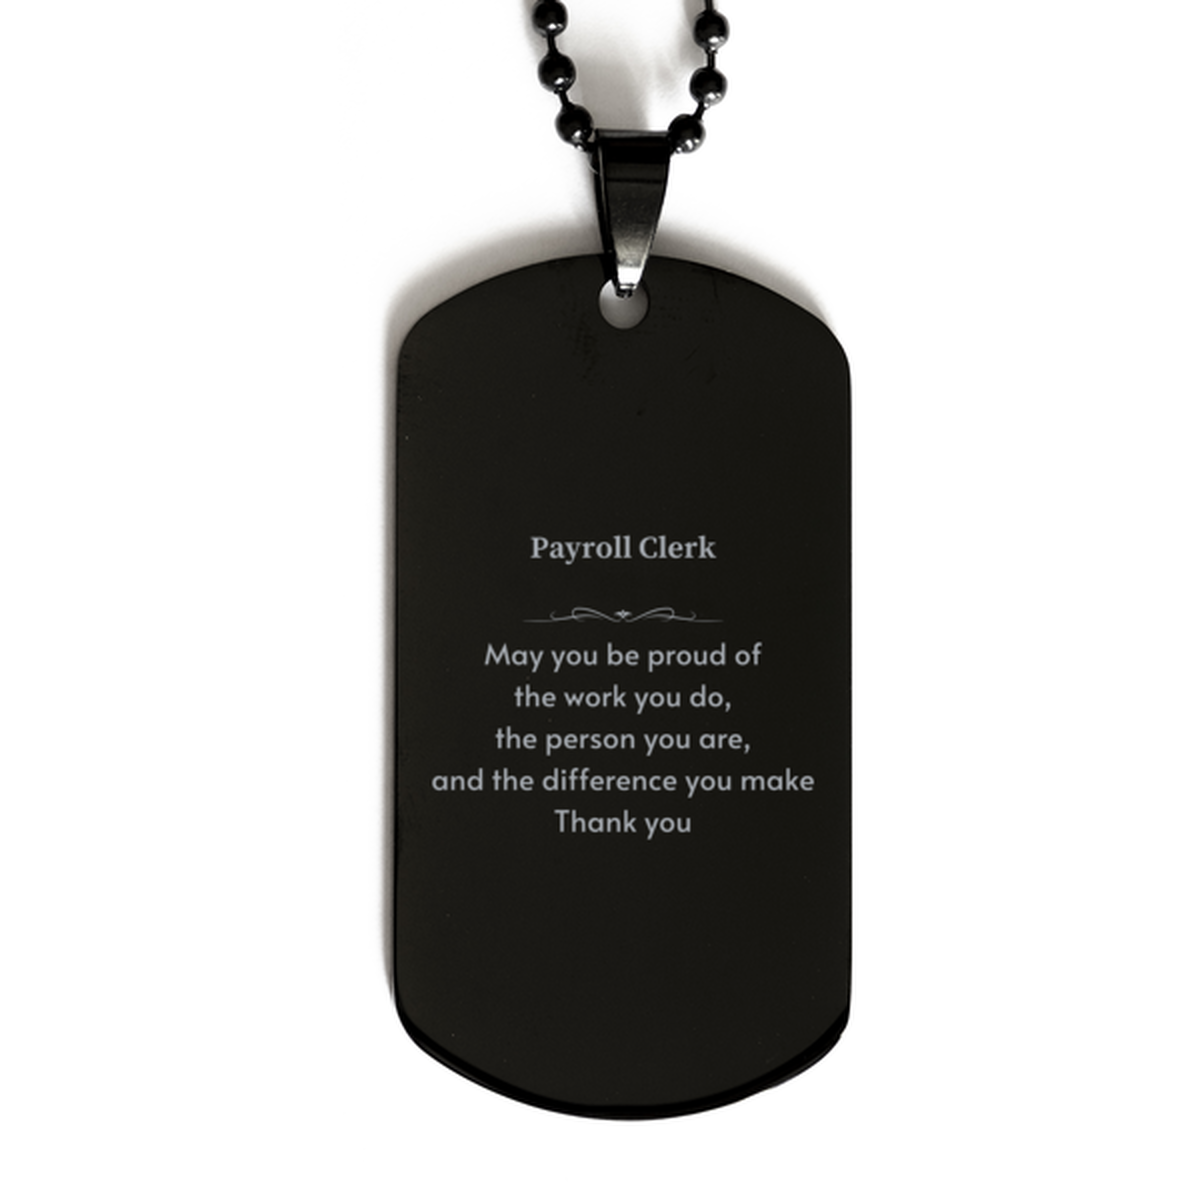 Heartwarming Black Dog Tag Retirement Coworkers Gifts for Payroll Clerk, Payroll Clerk May You be proud of the work you do, the person you are Gifts for Boss Men Women Friends